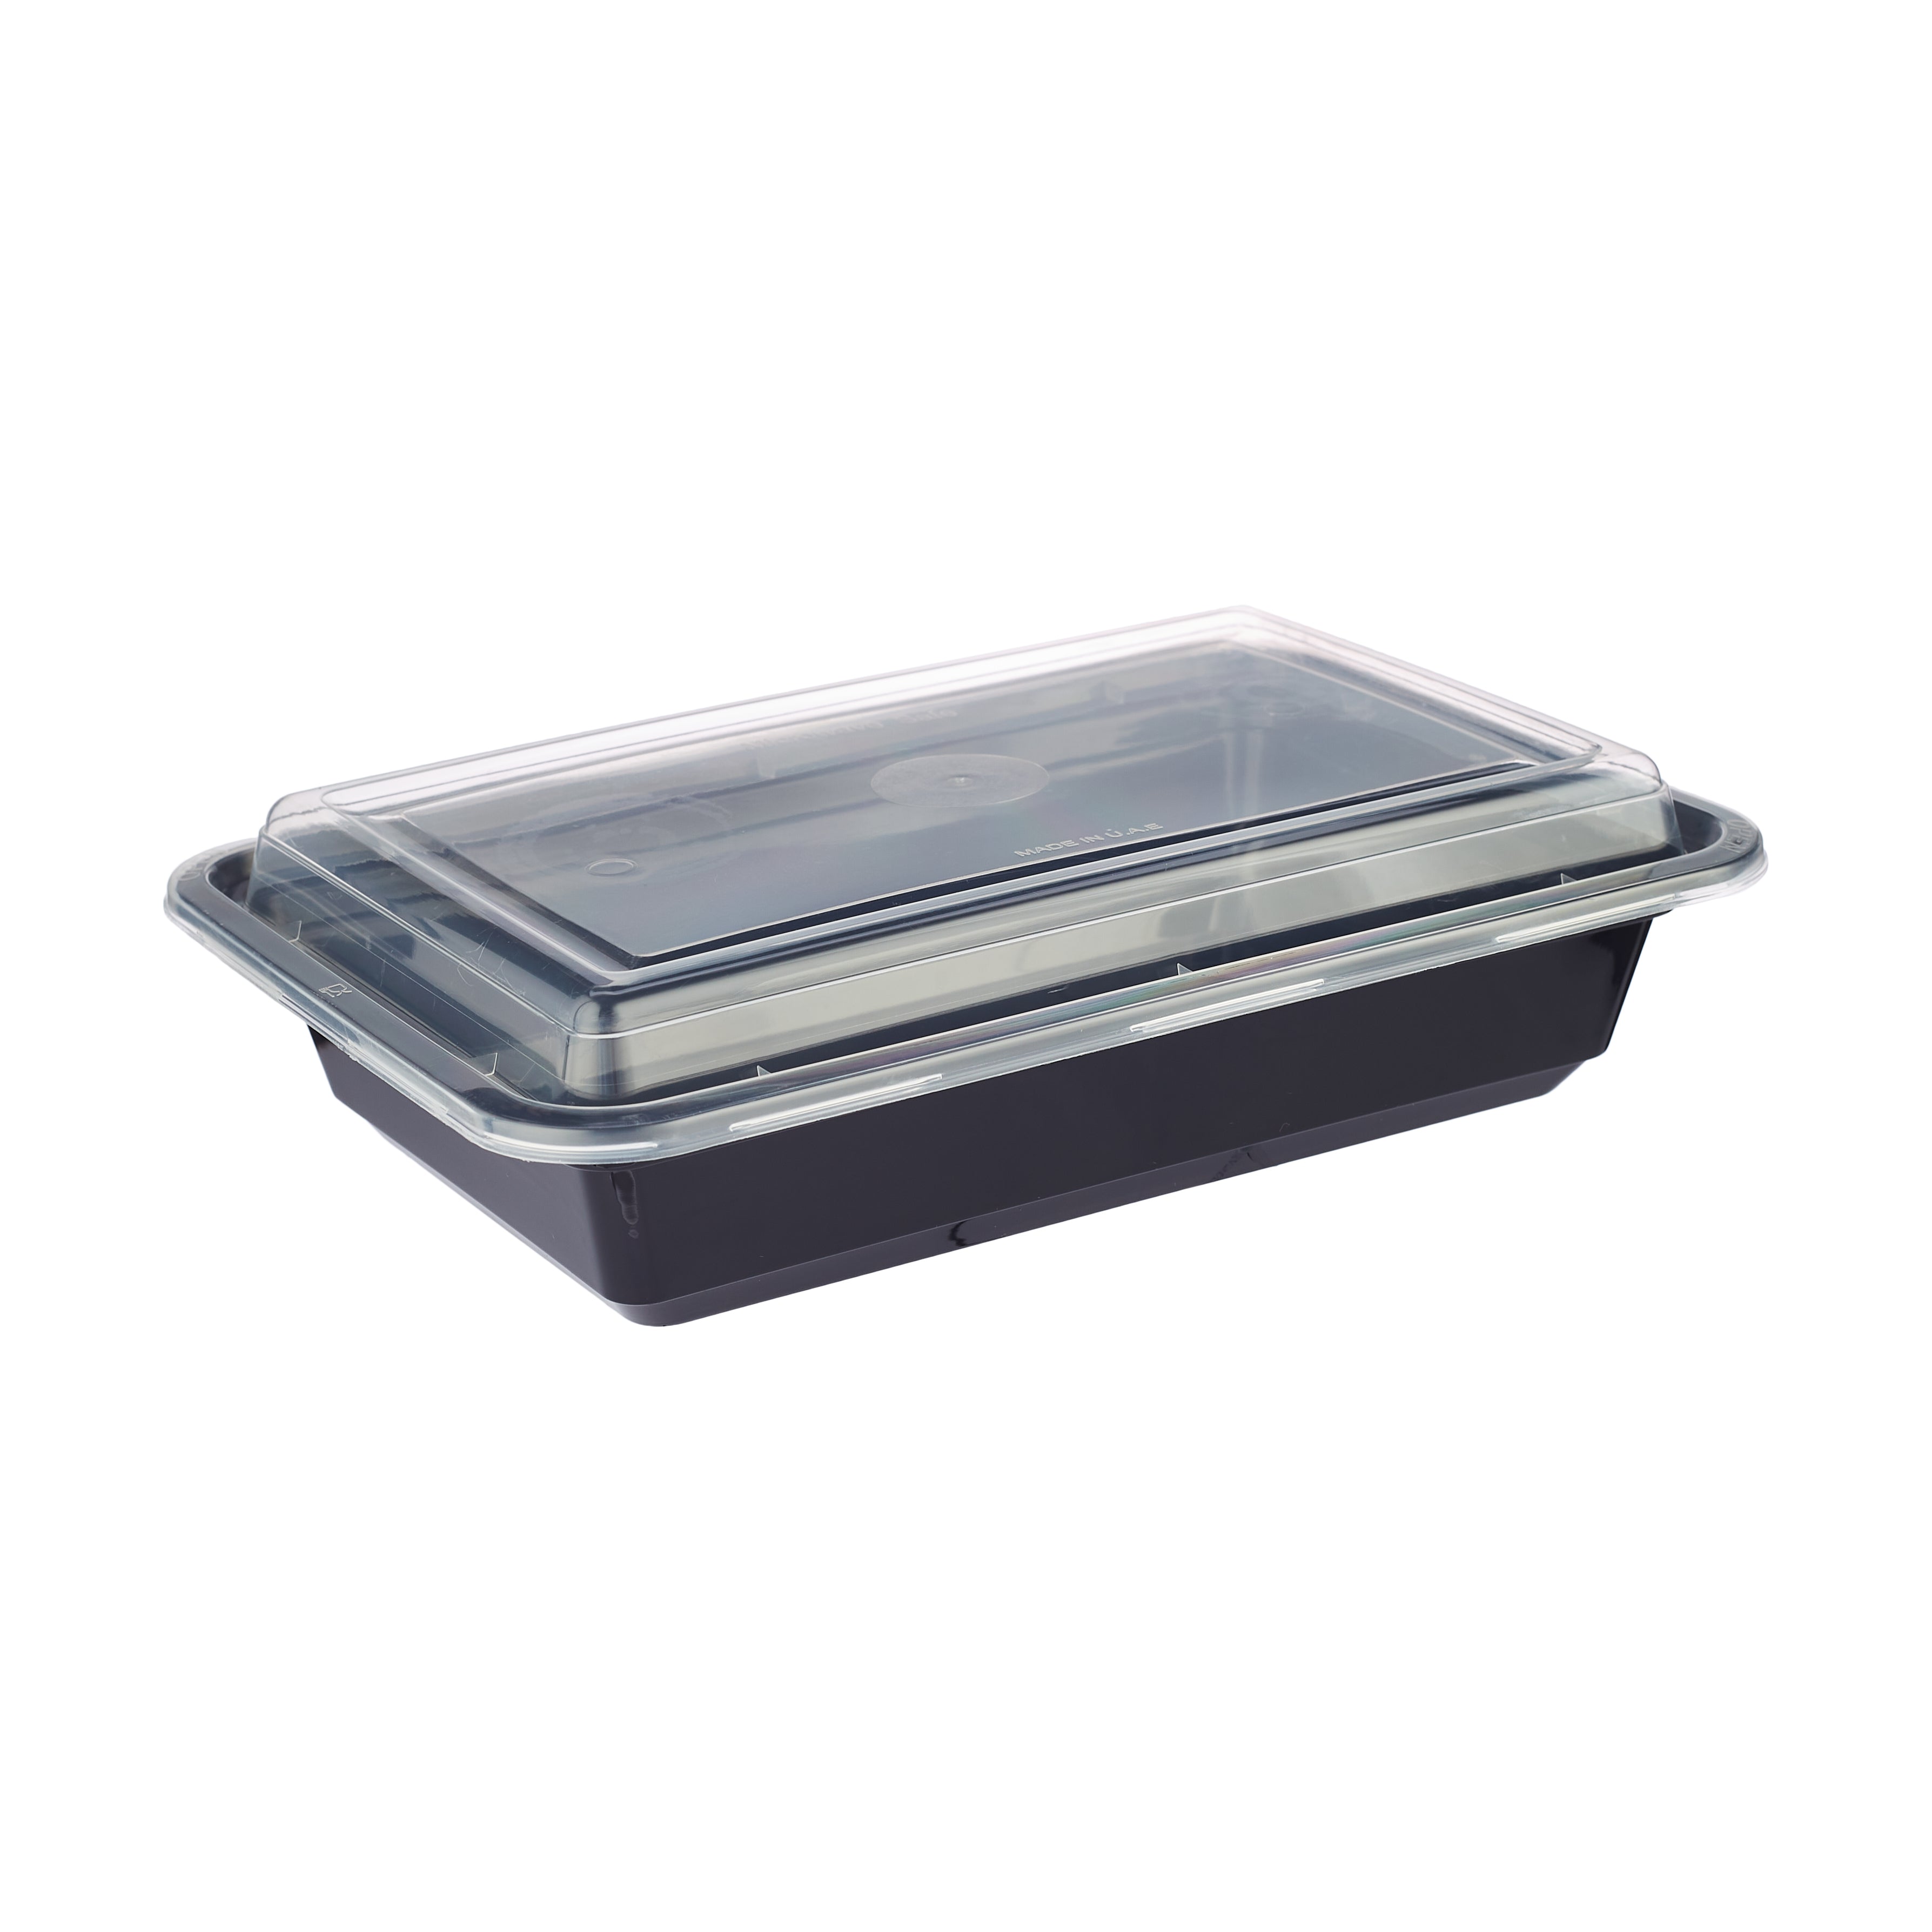 150 Pieces Black Base Rectangular Container 28 Oz With Lid -Hotpack